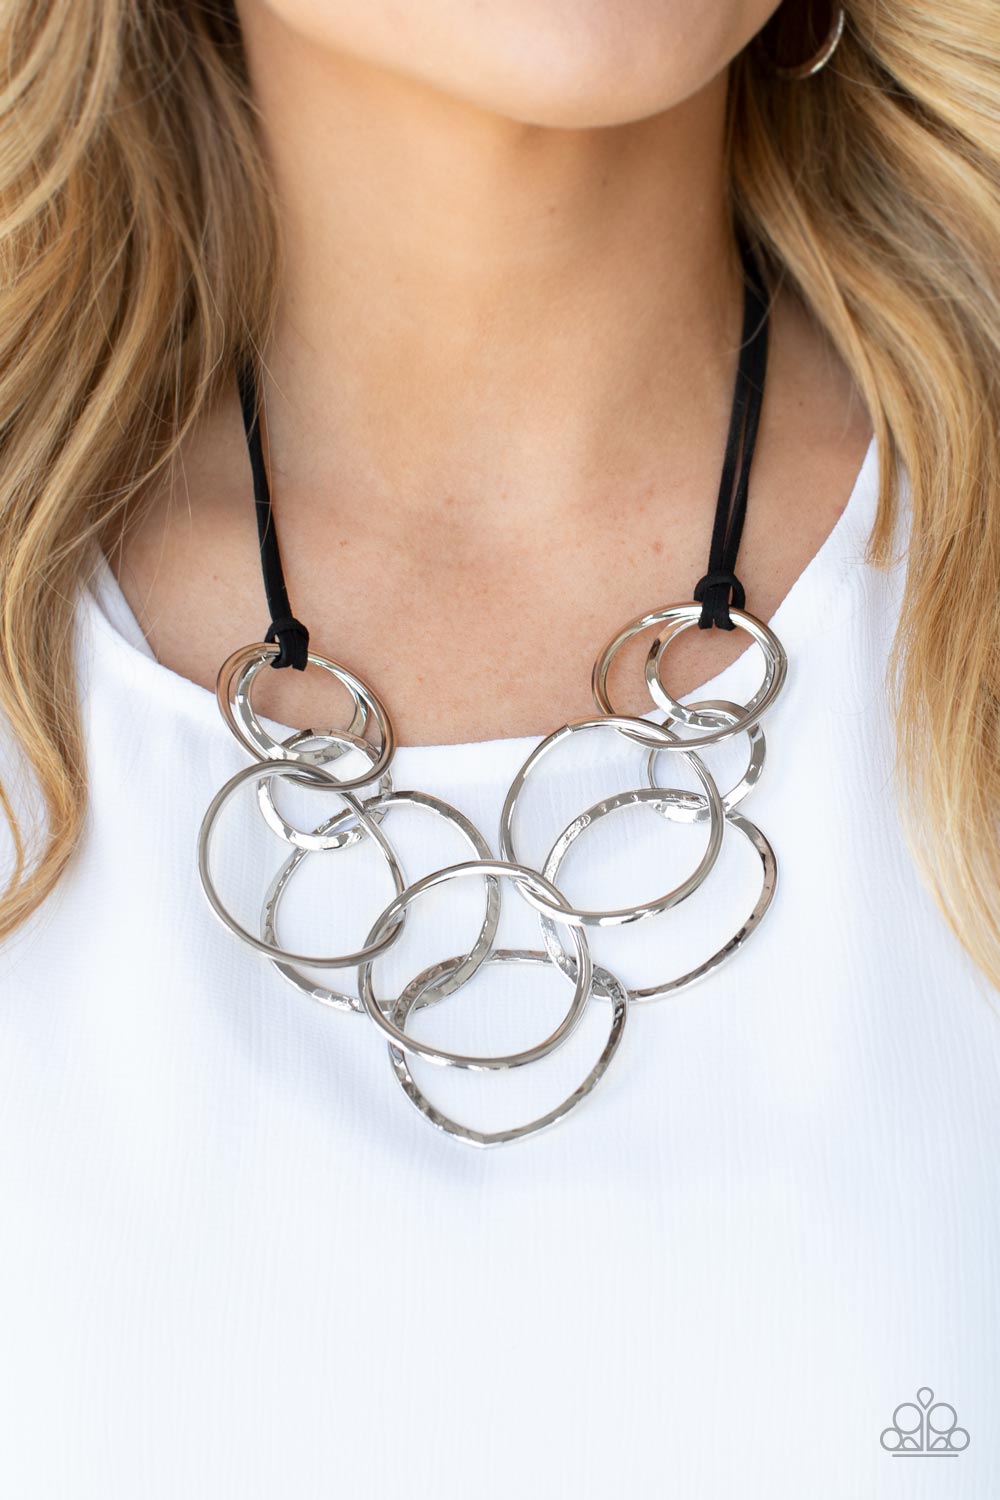 Spiraling Out of COUTURE Silver and Black Necklace - Paparazzi Accessories- model - CarasShop.com - $5 Jewelry by Cara Jewels